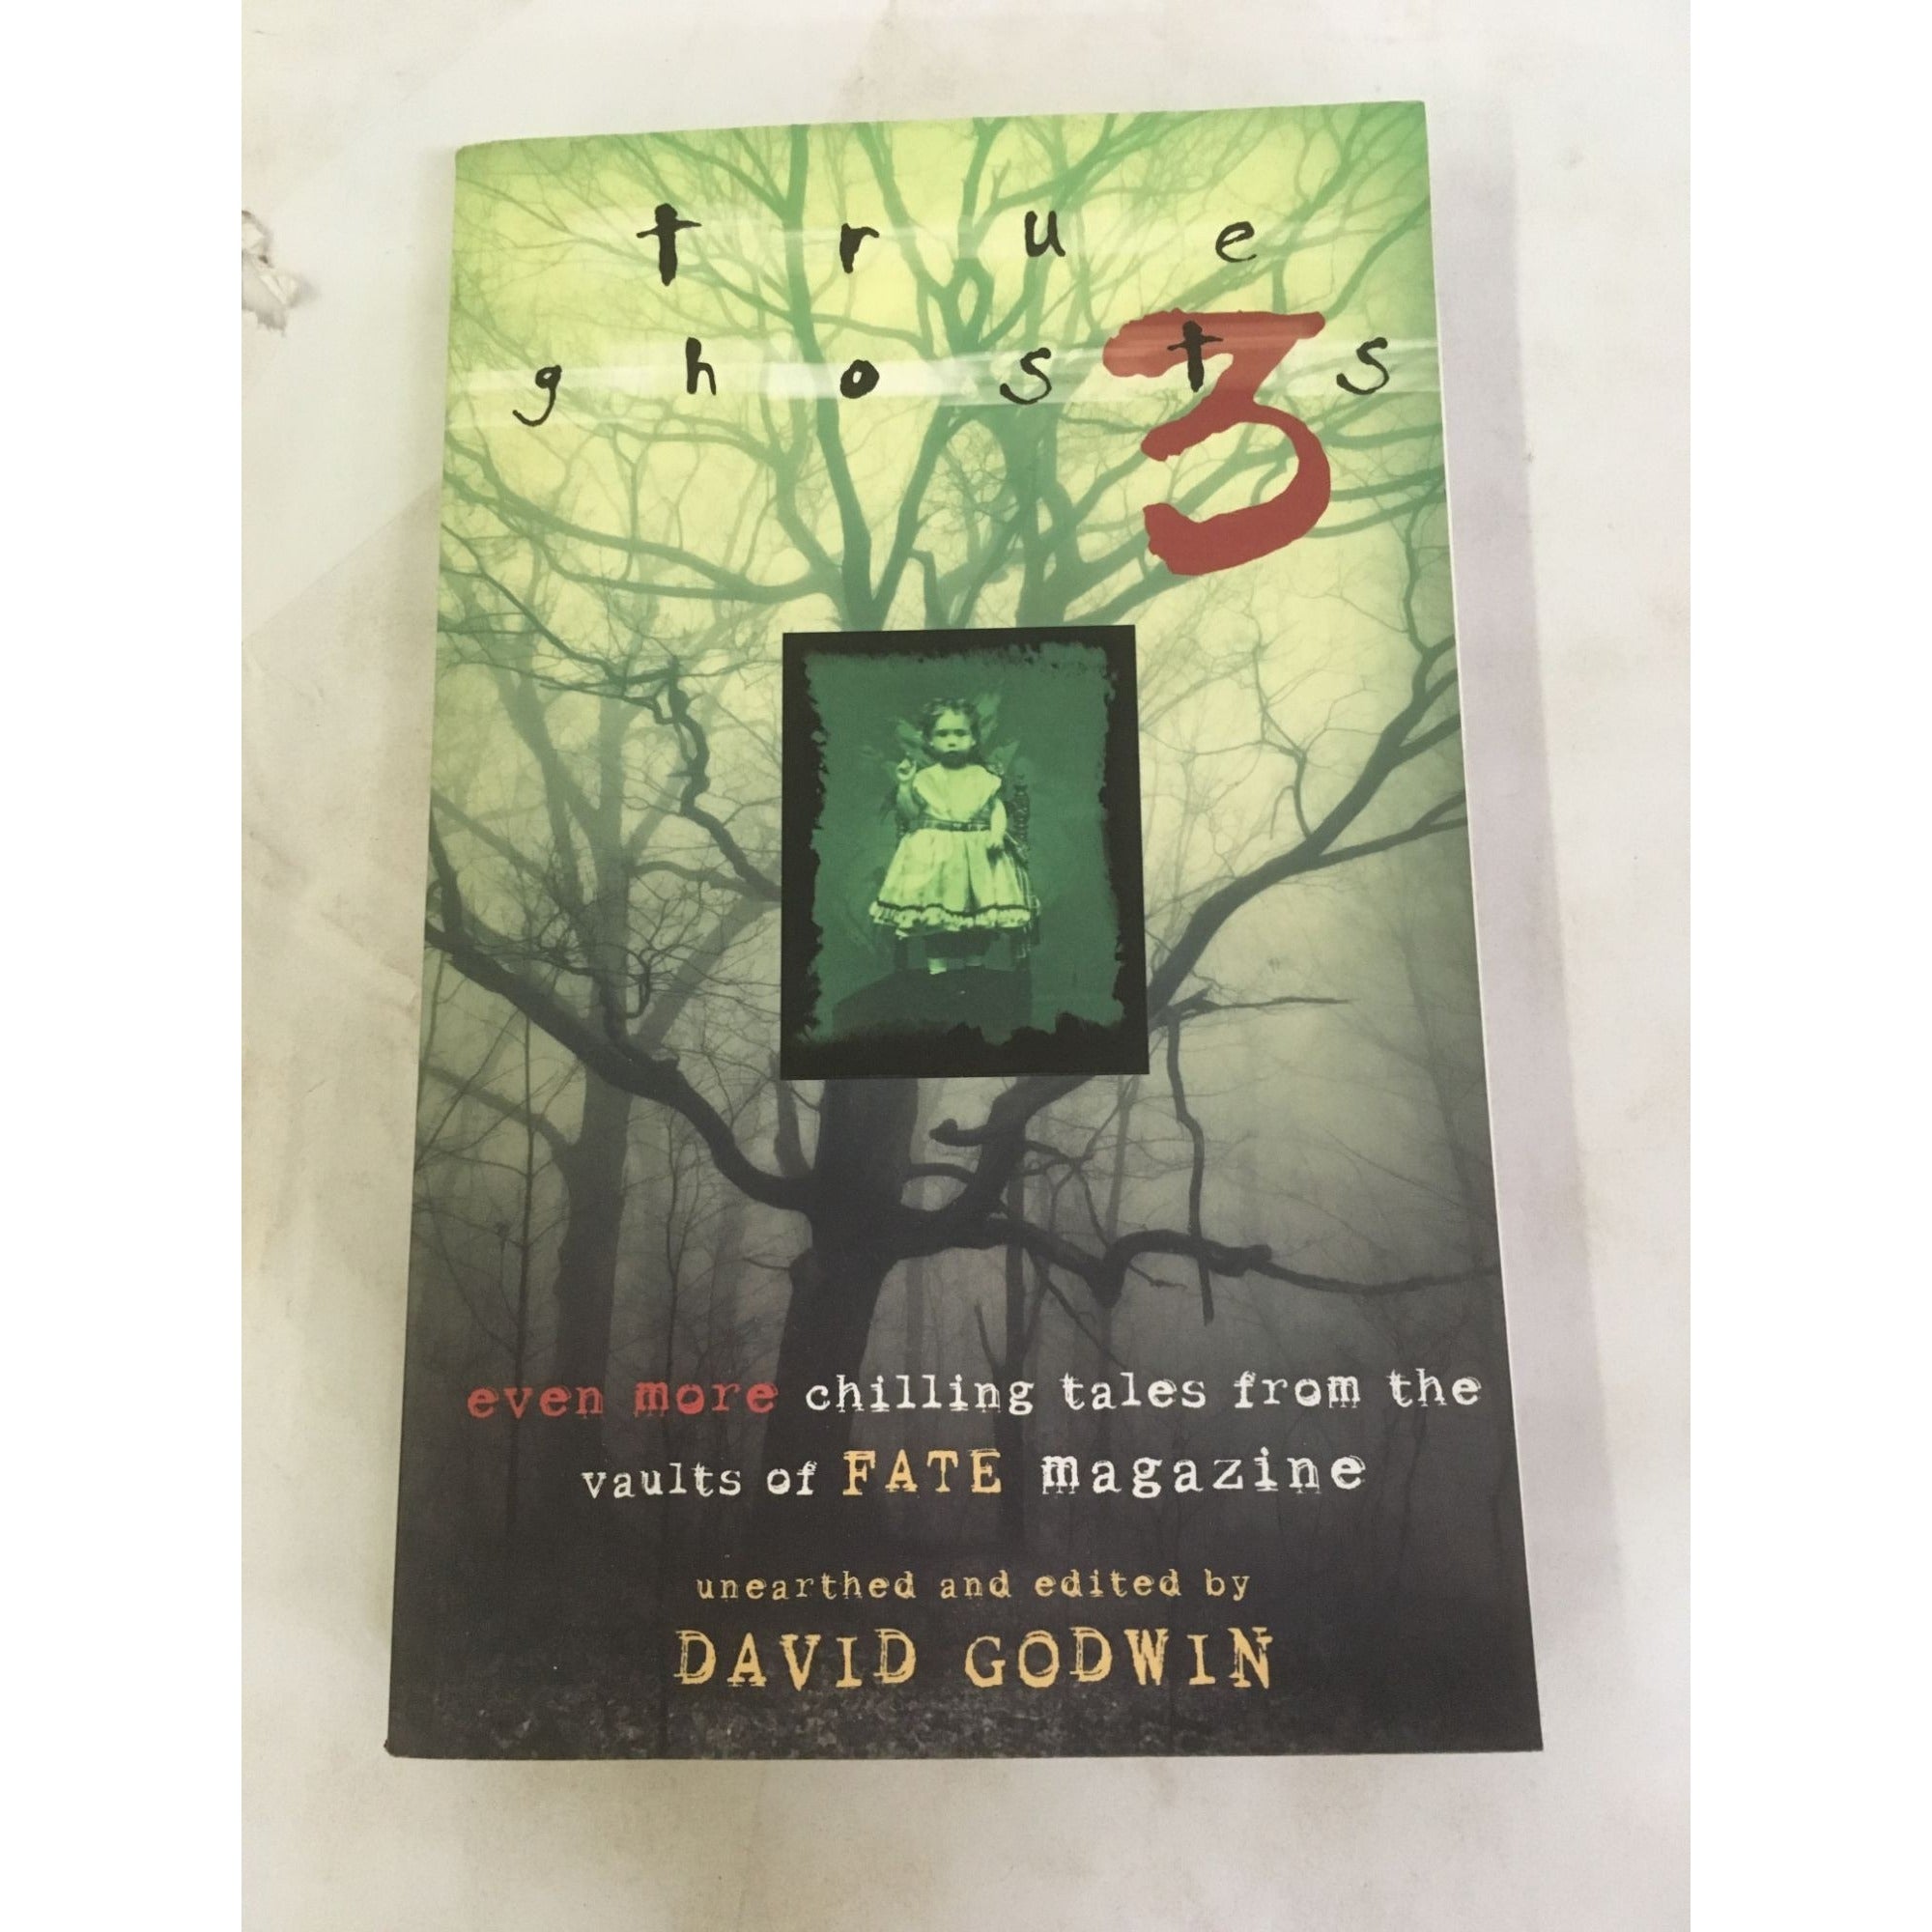 True Ghosts 3: Even More Chilling Tales from the Vaults of Fate Magazine by David Godwin